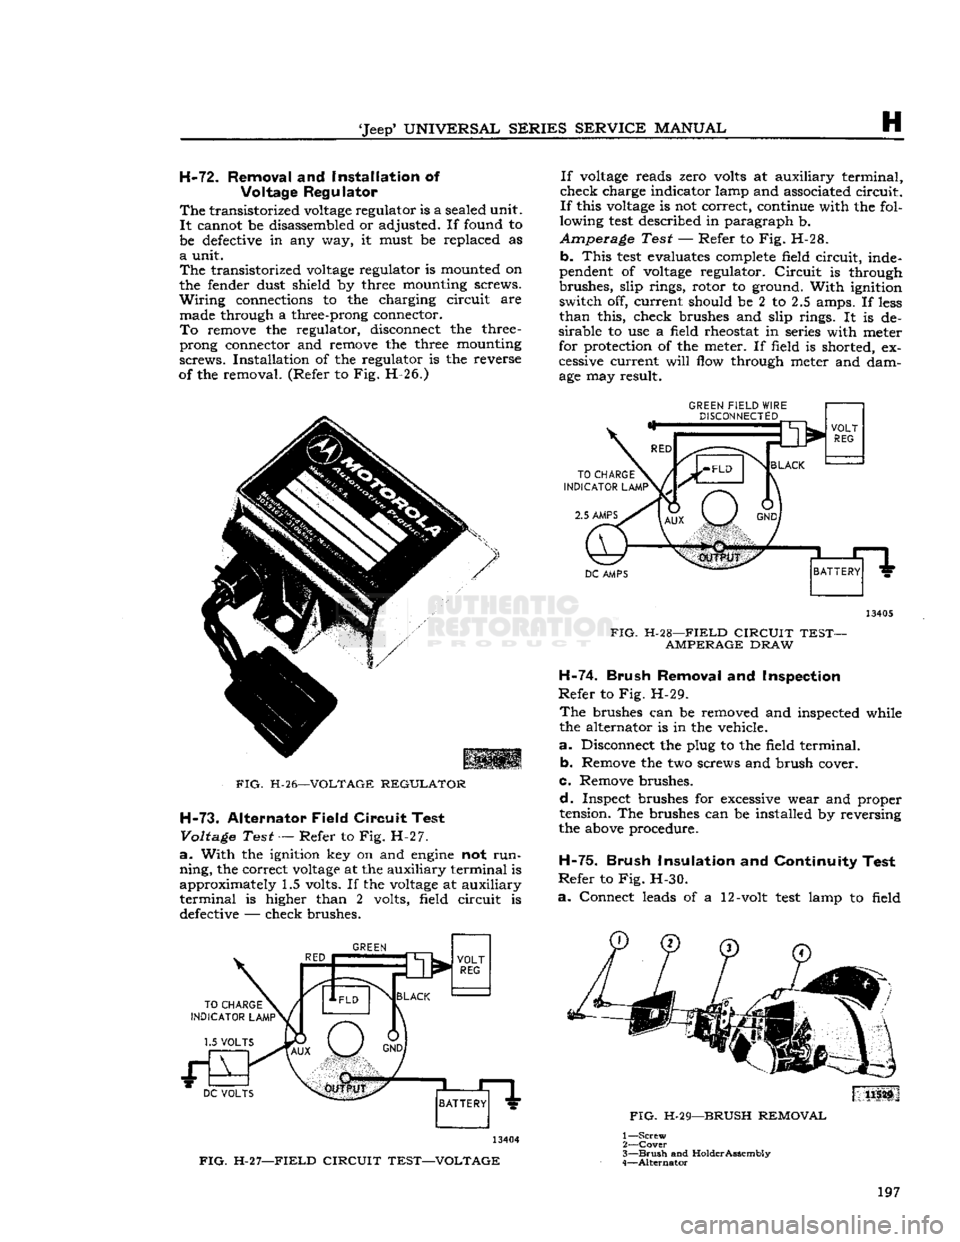 JEEP DJ 1953  Service Manual 
Jeep
 UNIVERSAL SERIES SERVICE
 MANUAL 

H 
H-72.
 Removal
 and
 Installation
 of 

Voltage Regulator 

The
 transistorized
 voltage
 regulator is a sealed unit. 
 It
 cannot be disassembled or adj